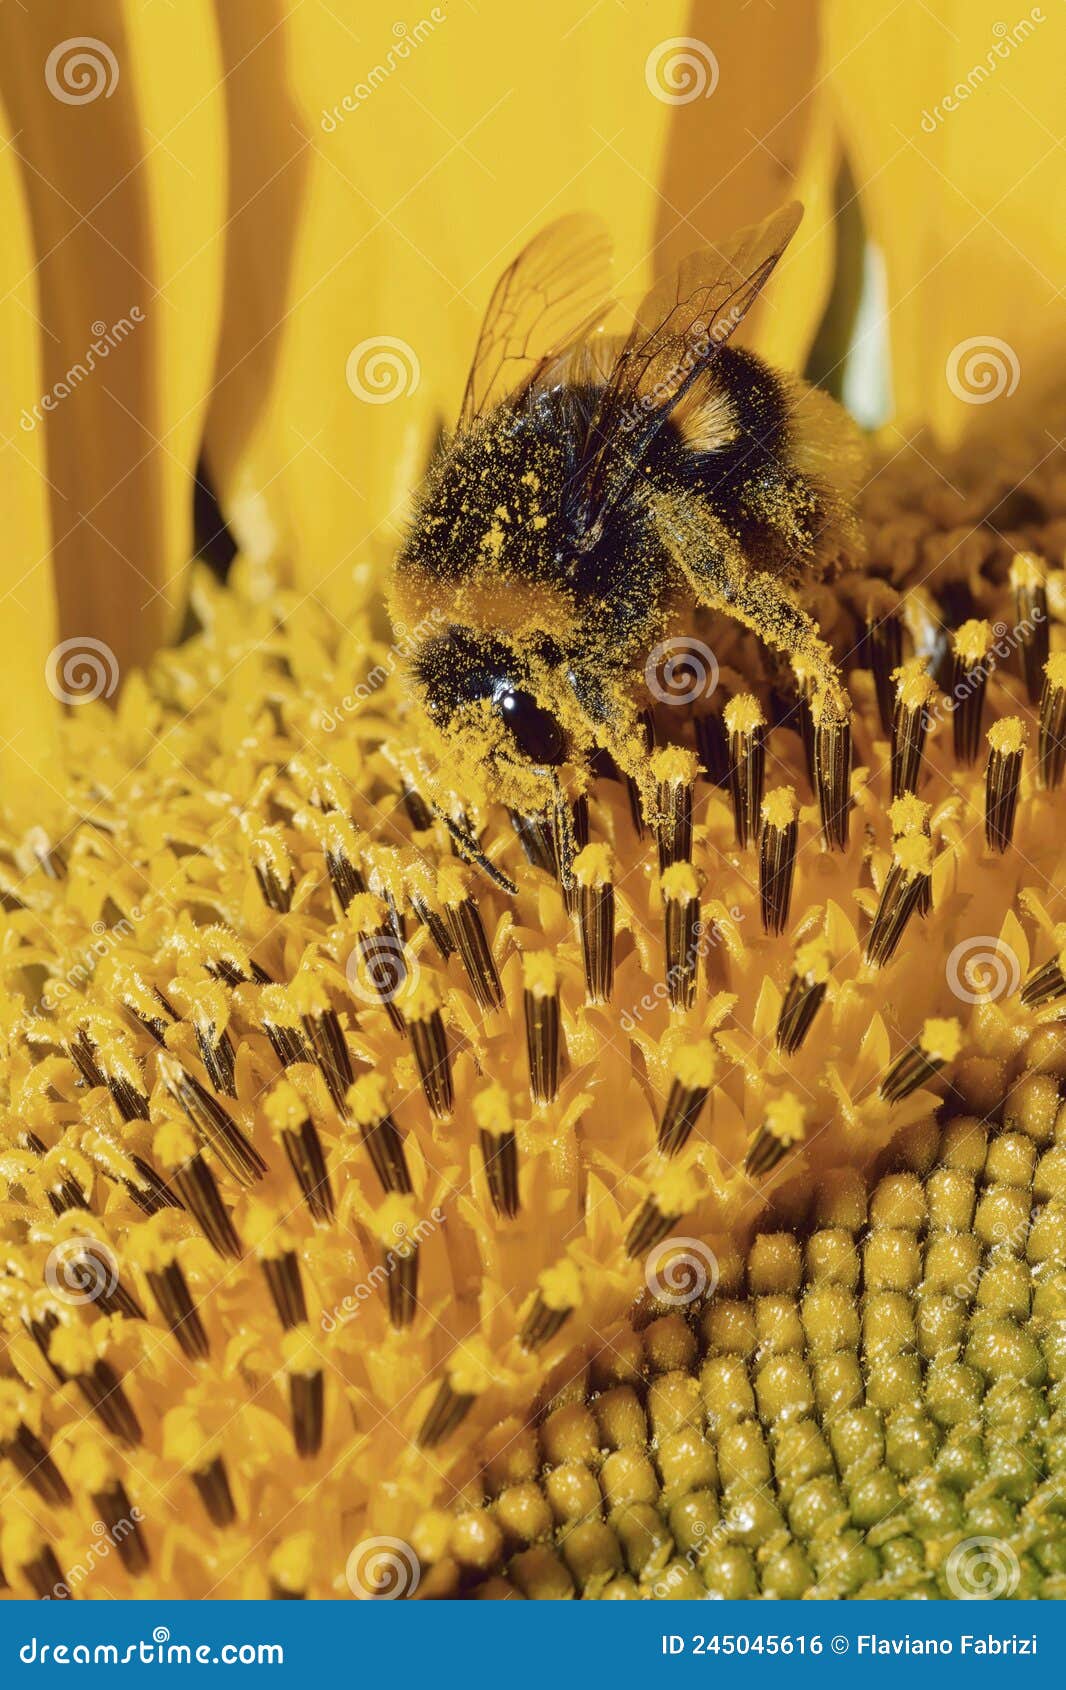 bumblebee covered in pollen on a sunflower